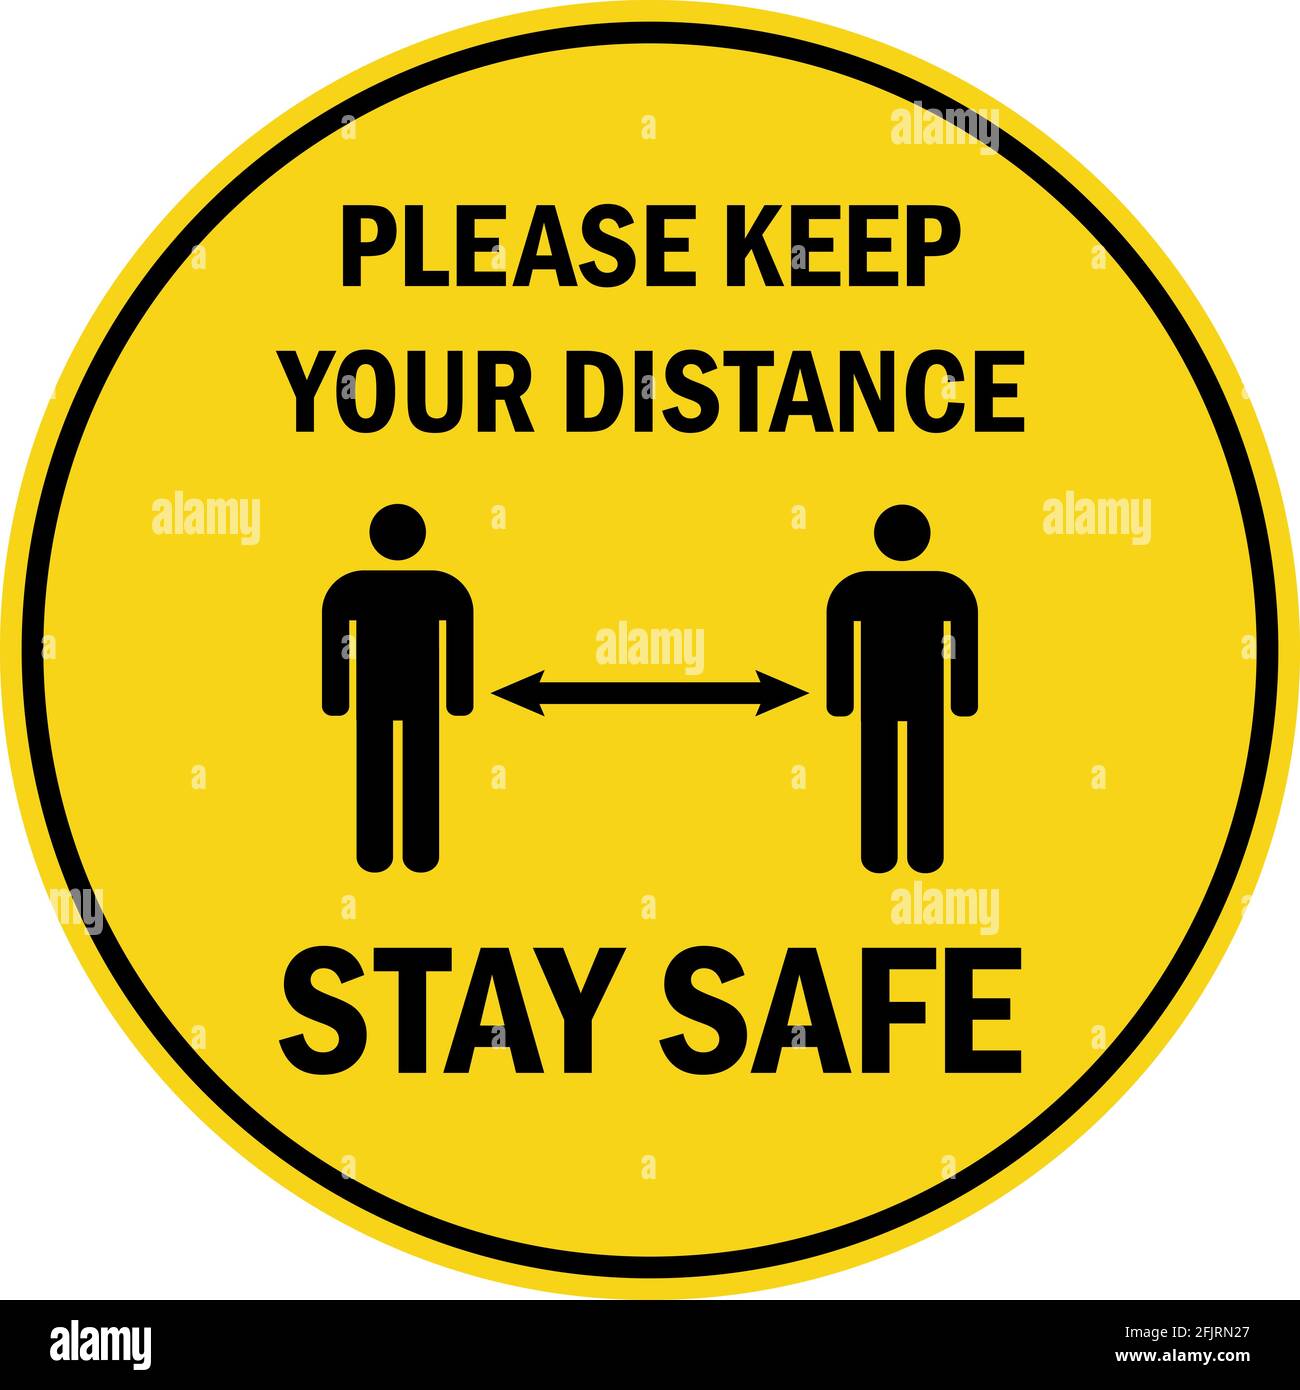 Keep Your Distance Social Distancing 2 Metres 6ft Apart Health and Safety Sign 